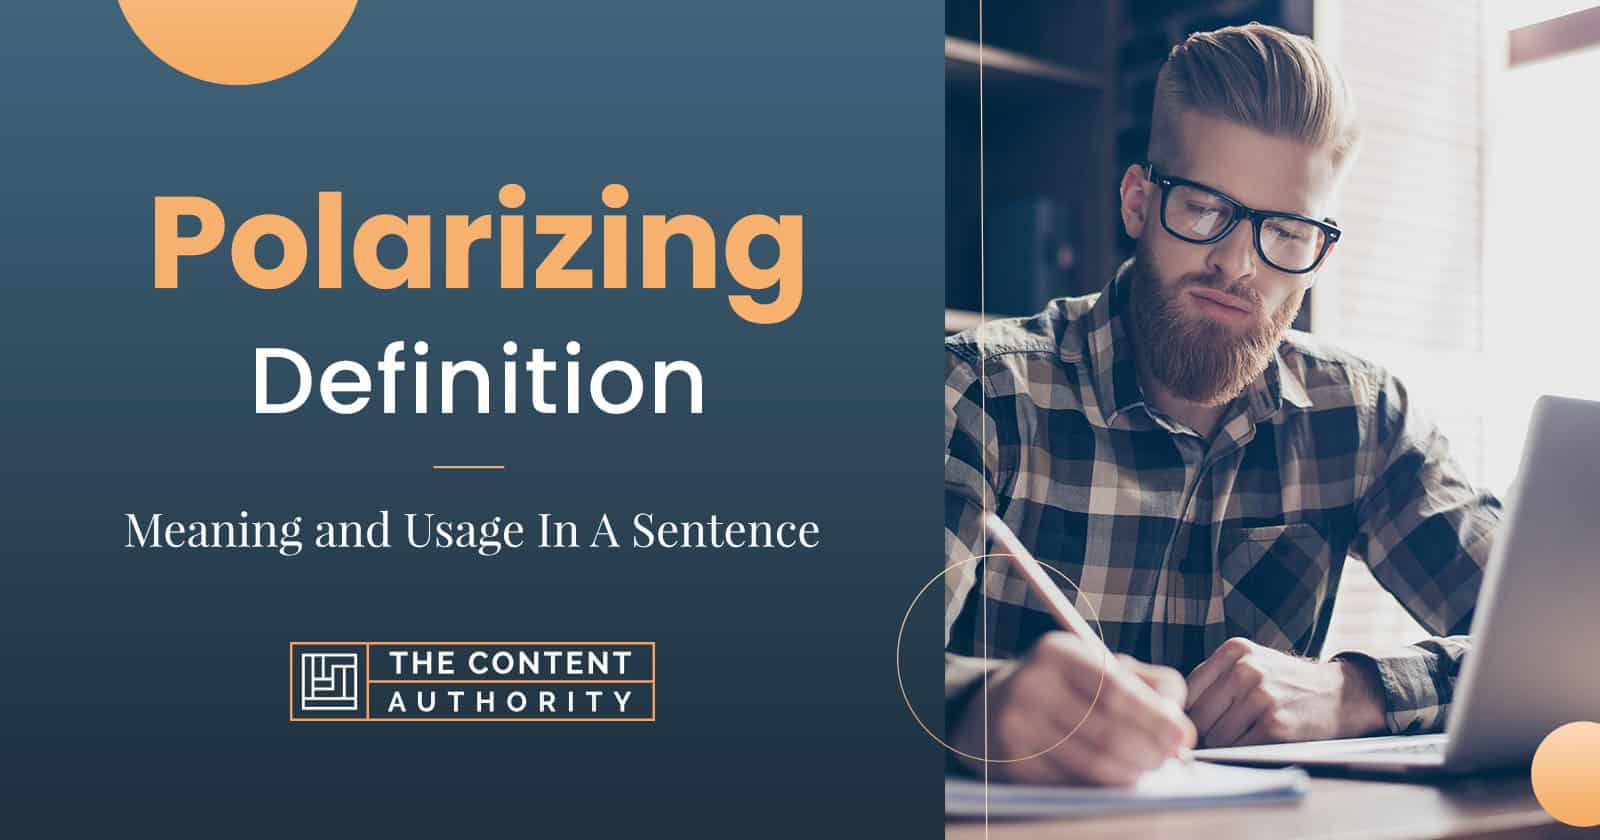 Polarizing Definition – Meaning and Usage In A Sentence